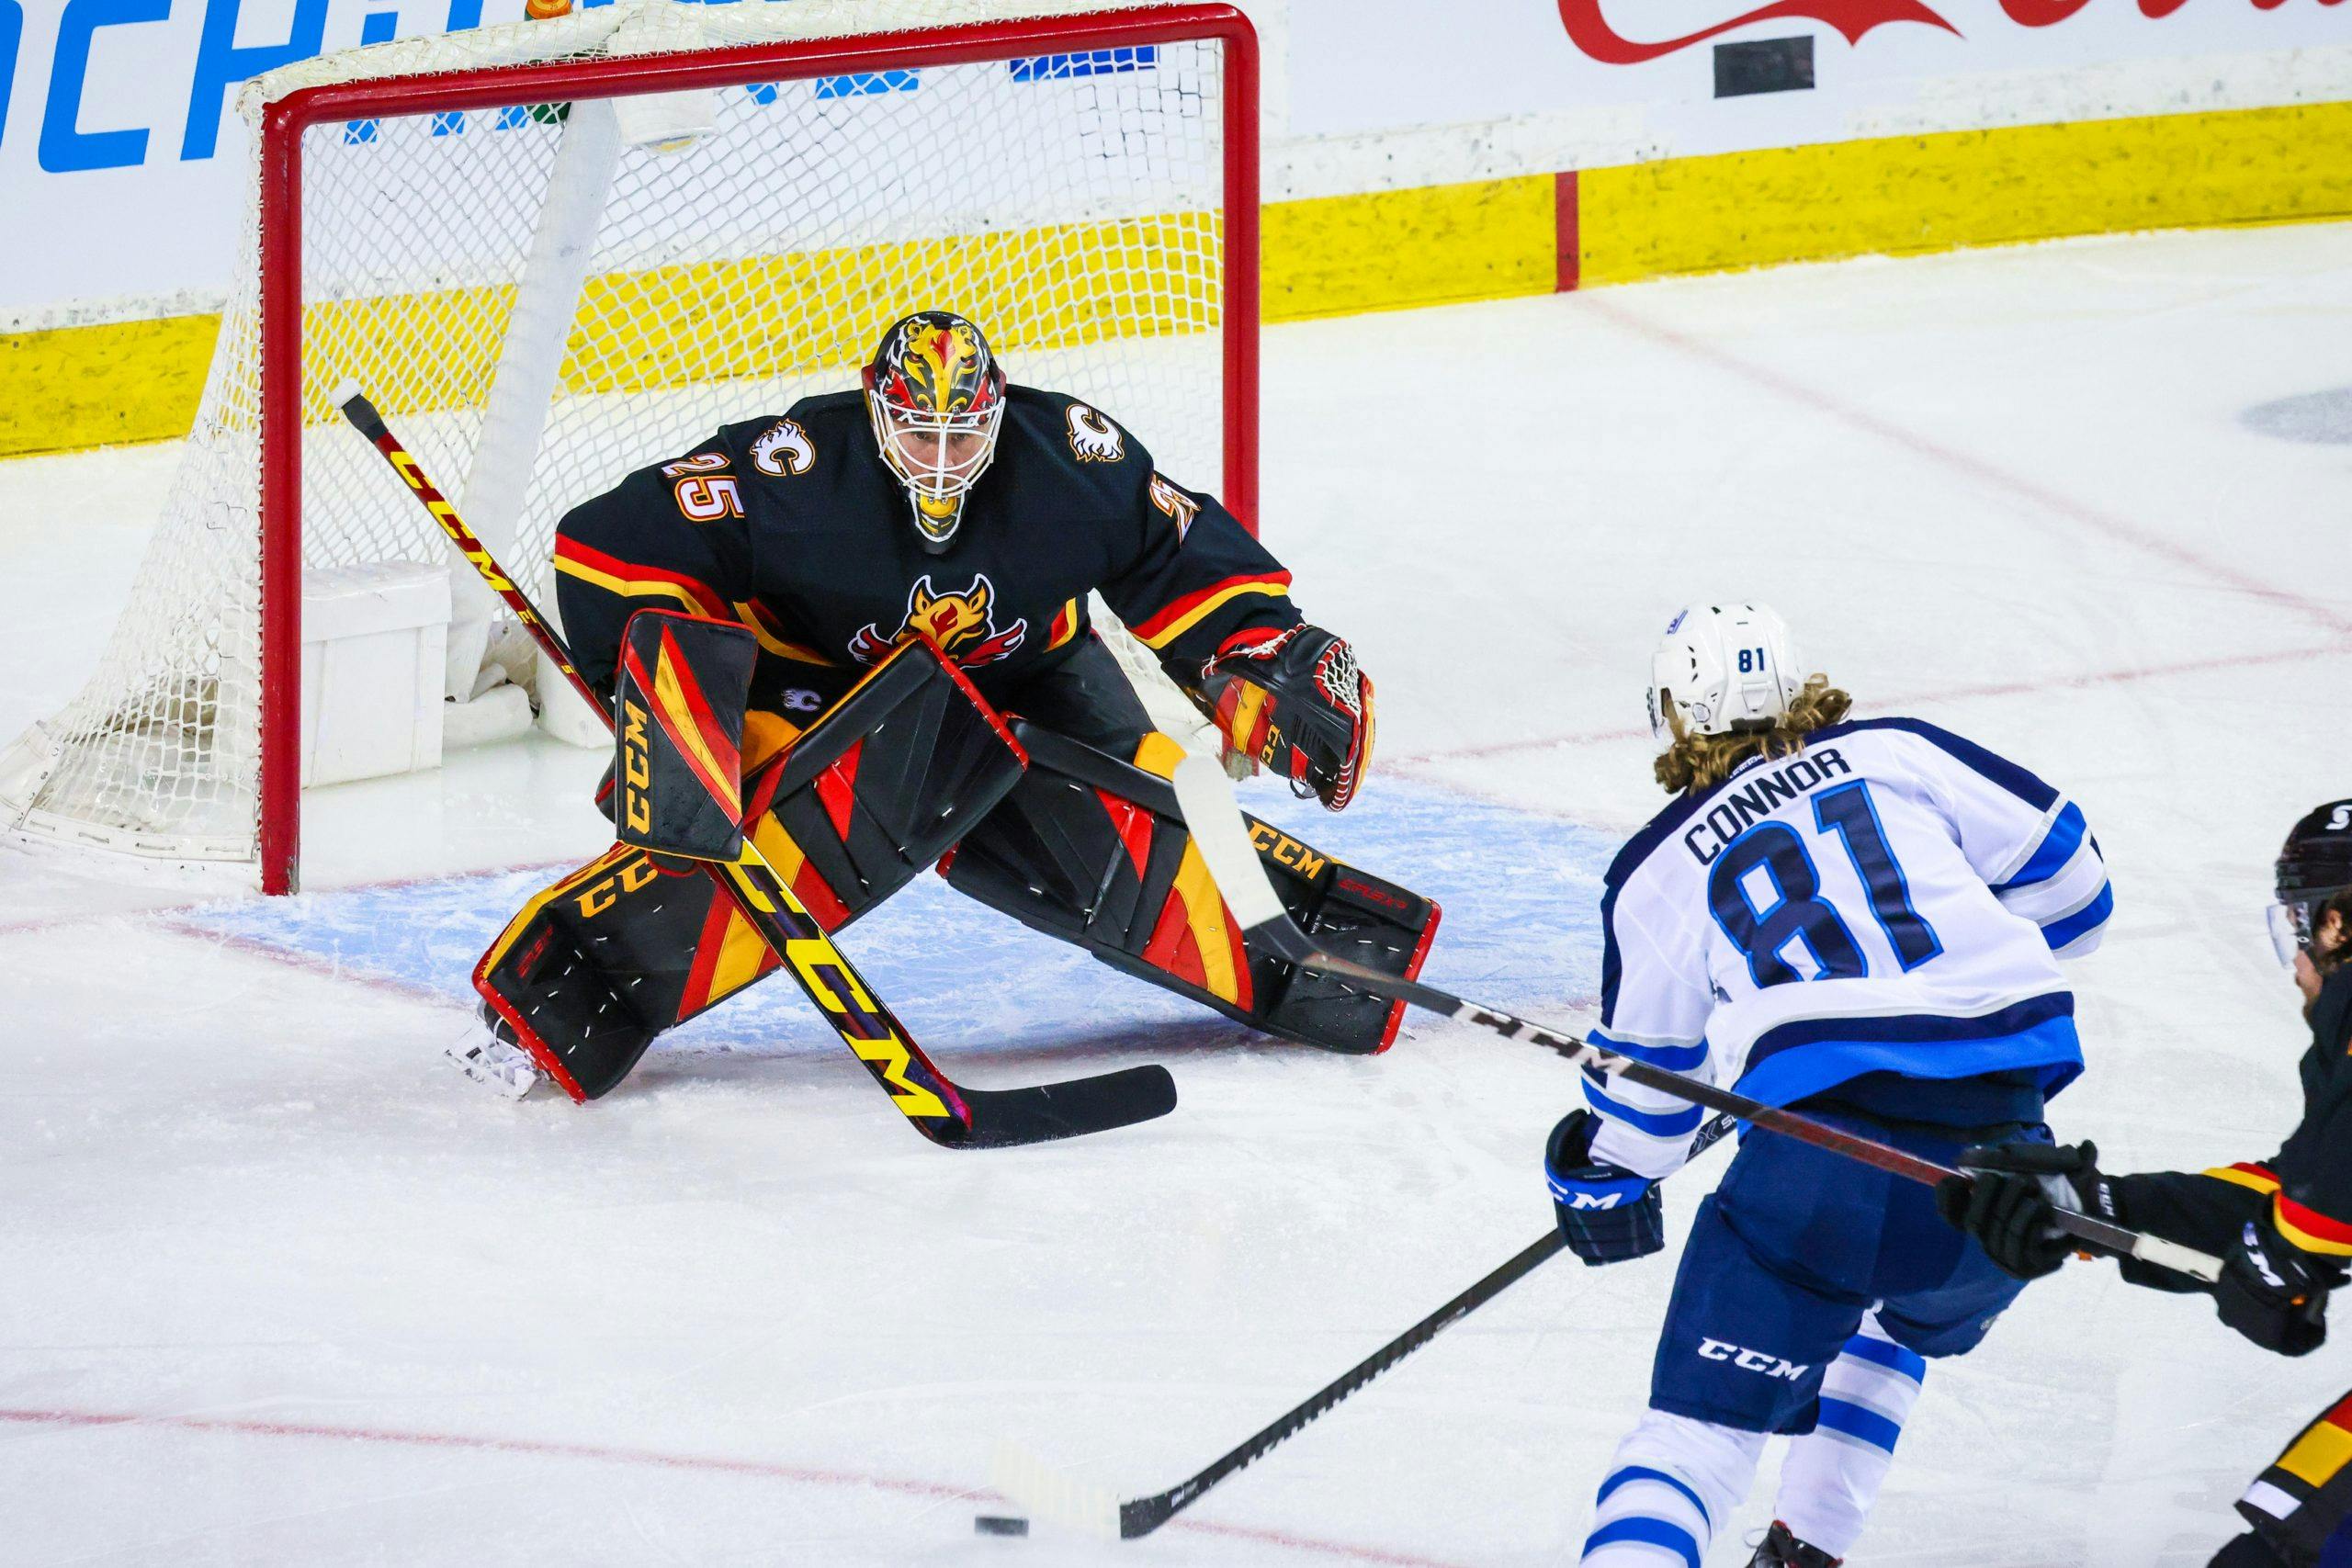 Calgary Flames sign goaltender Jacob Markstrom to 6-year, $36 million US  deal